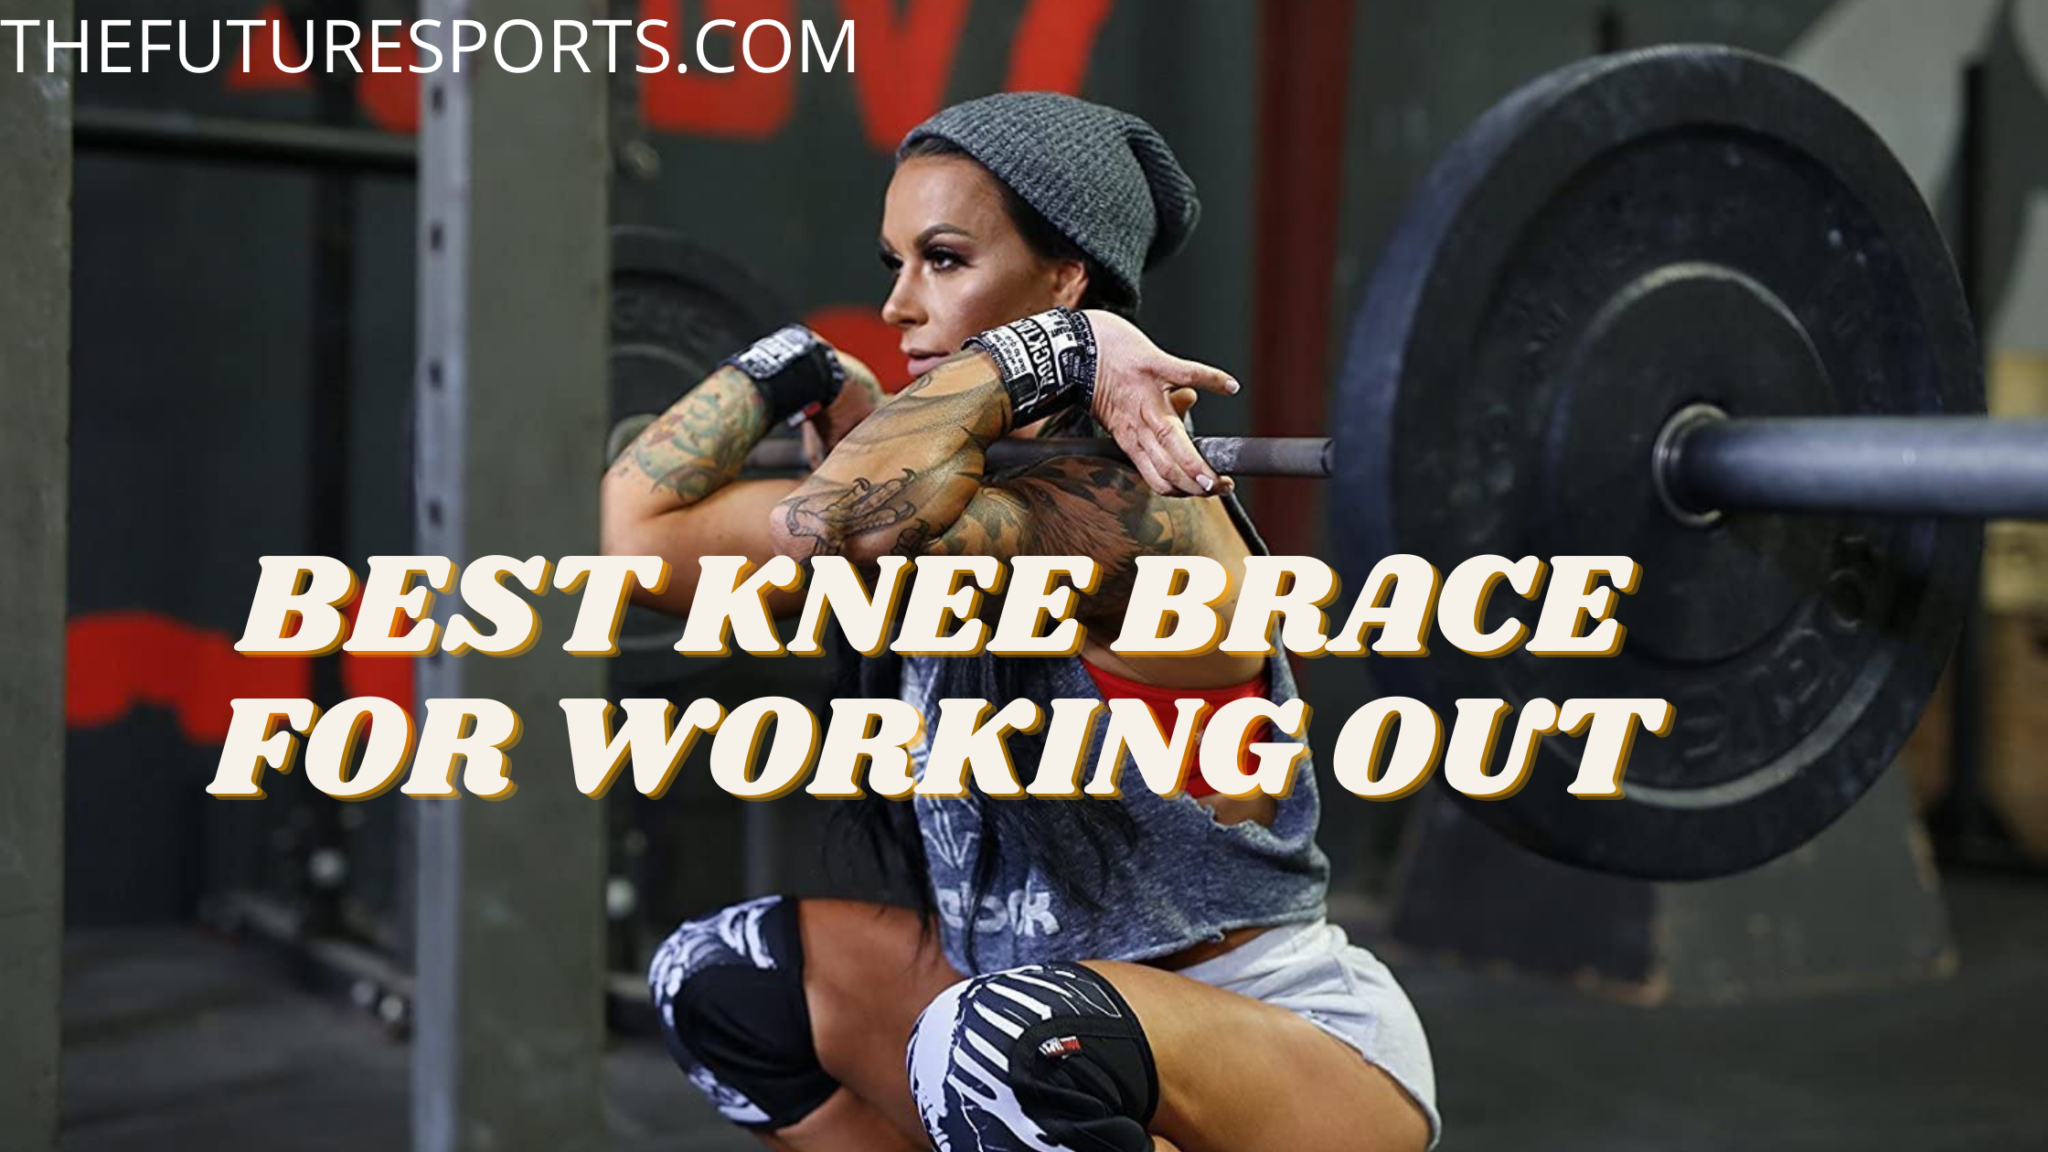 Best knee brace for working out